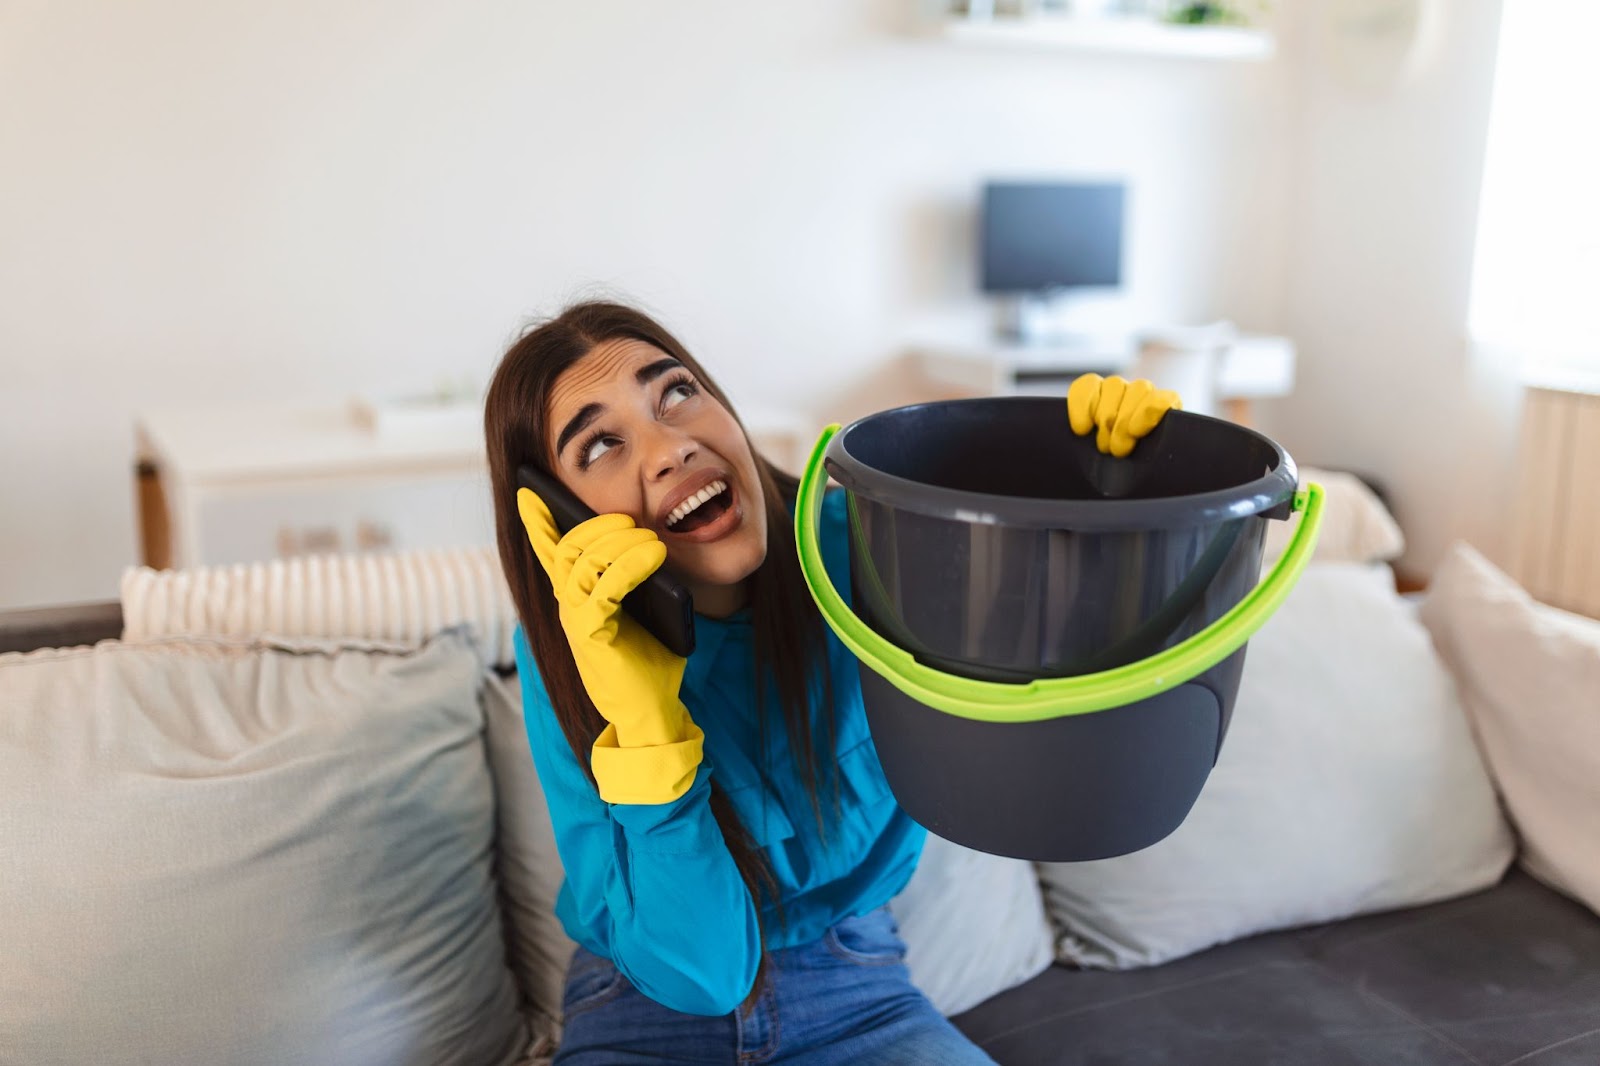 A woman holding a bucket and a phone